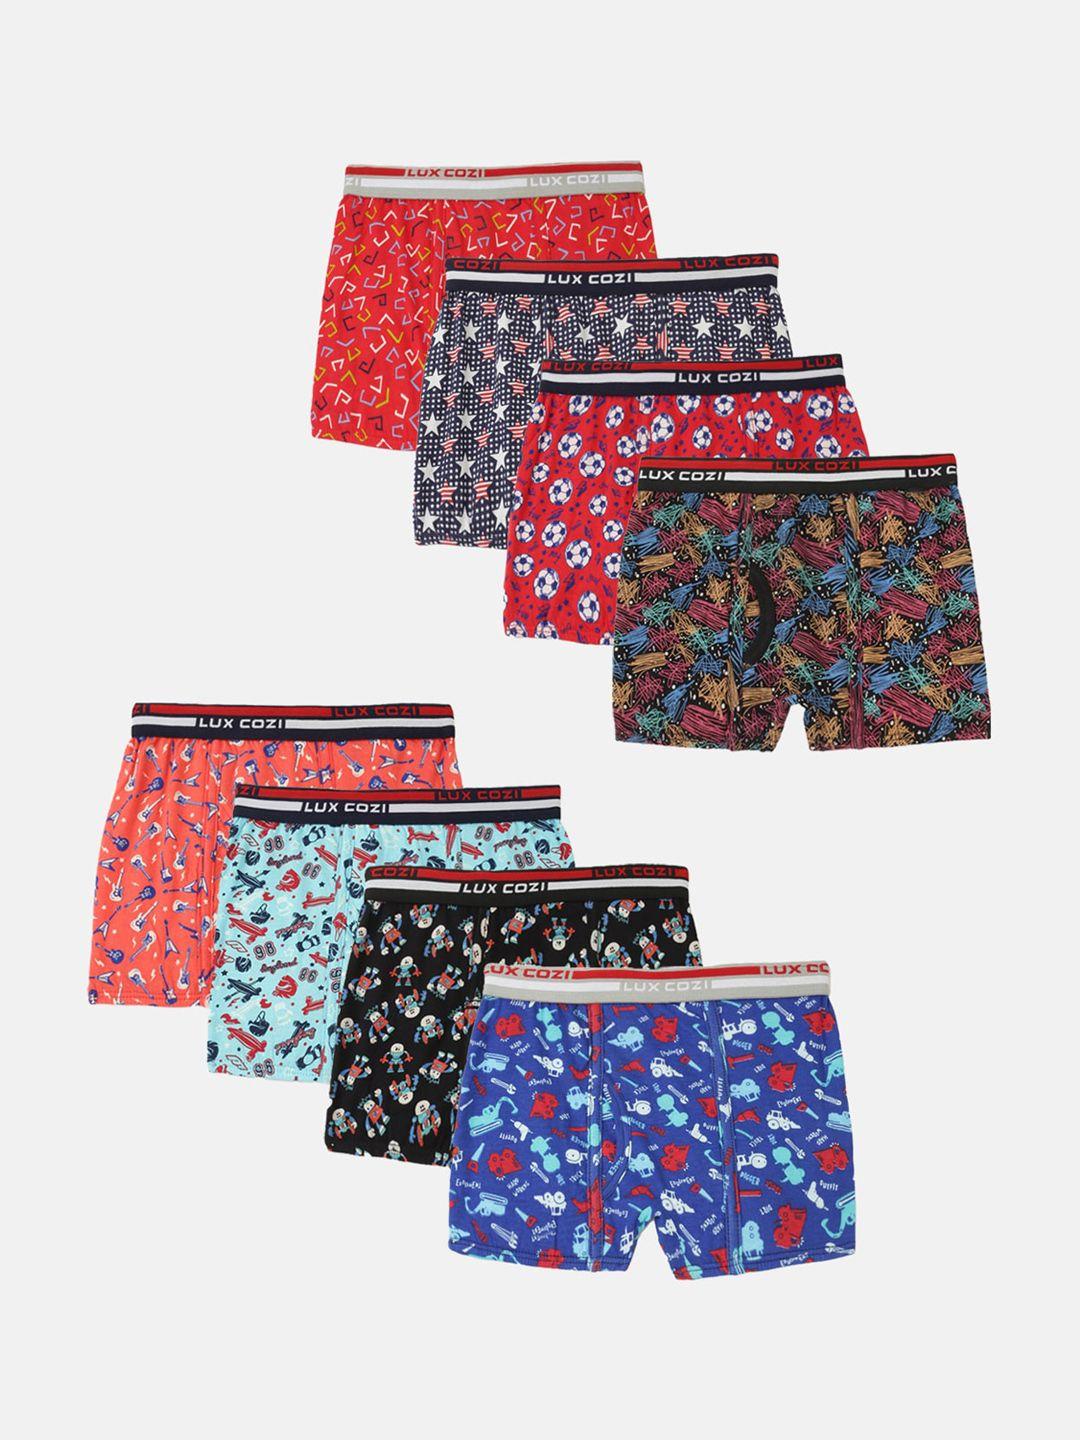 lux-cozi-boys-pack-of-8-assorted-printed-moisture-wicking-trunks